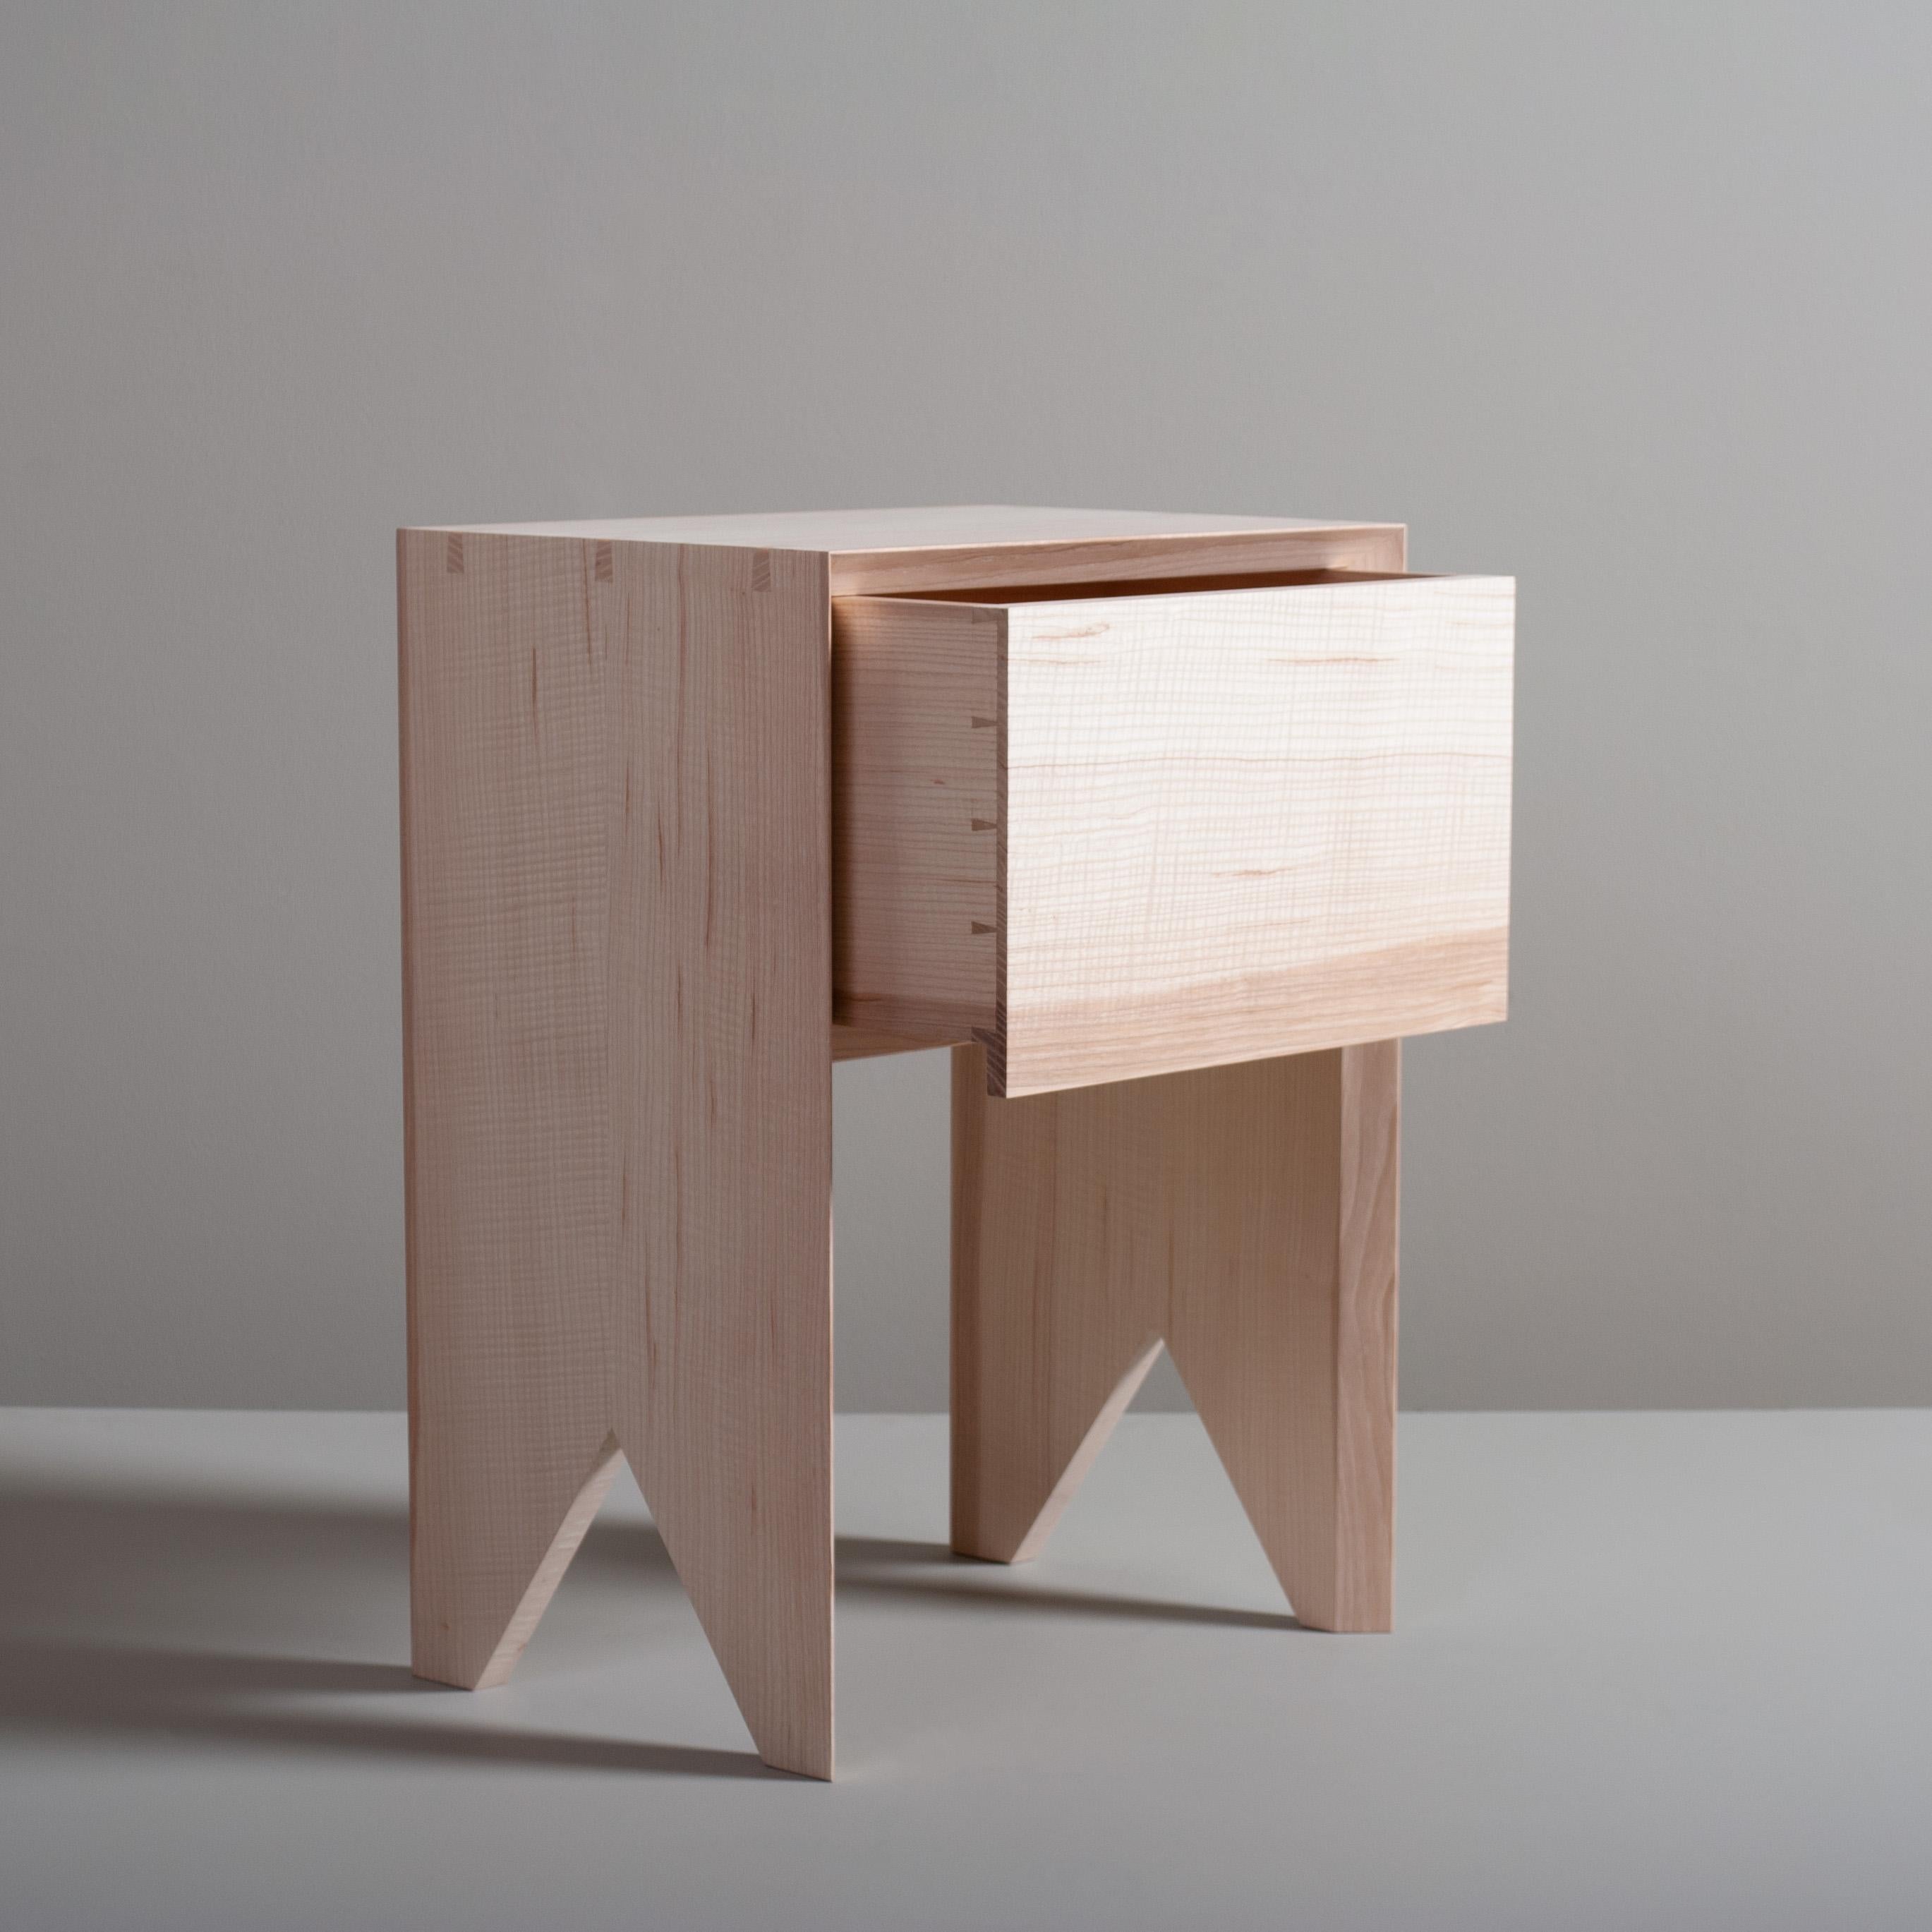 Ultra sleek contemporary hand-crafted English 'ripple' ash night stands with storage drawer. 
Designed with Asian minimalism in mind whilst highlighting the handmade construction details with exposed mitred key dovetail jointing. The strict clean